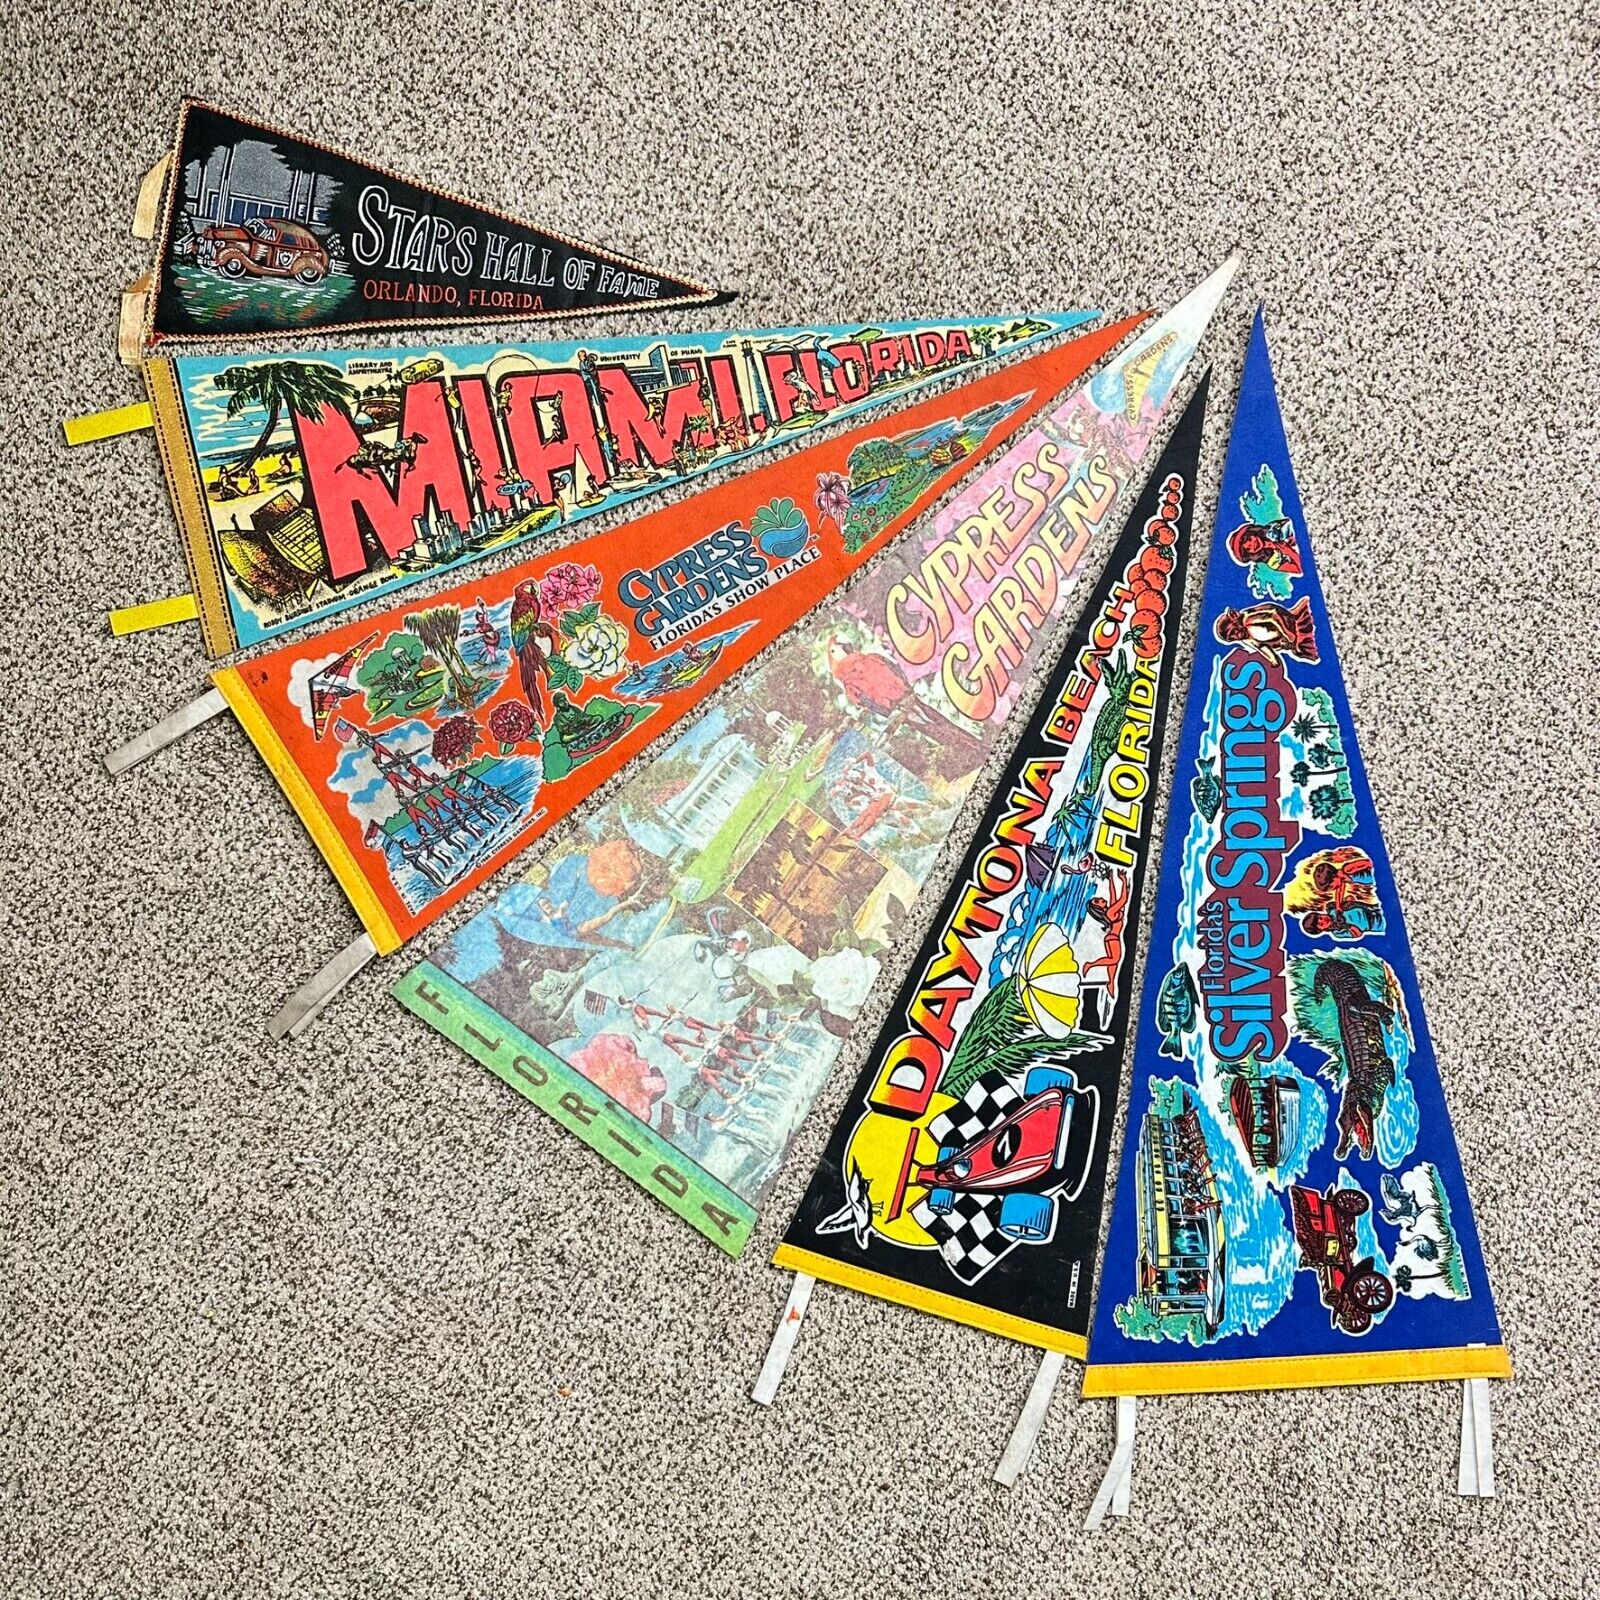 Collection of Vintage Florida Themed Travel Souvenir Pennants Banners Lot of 6